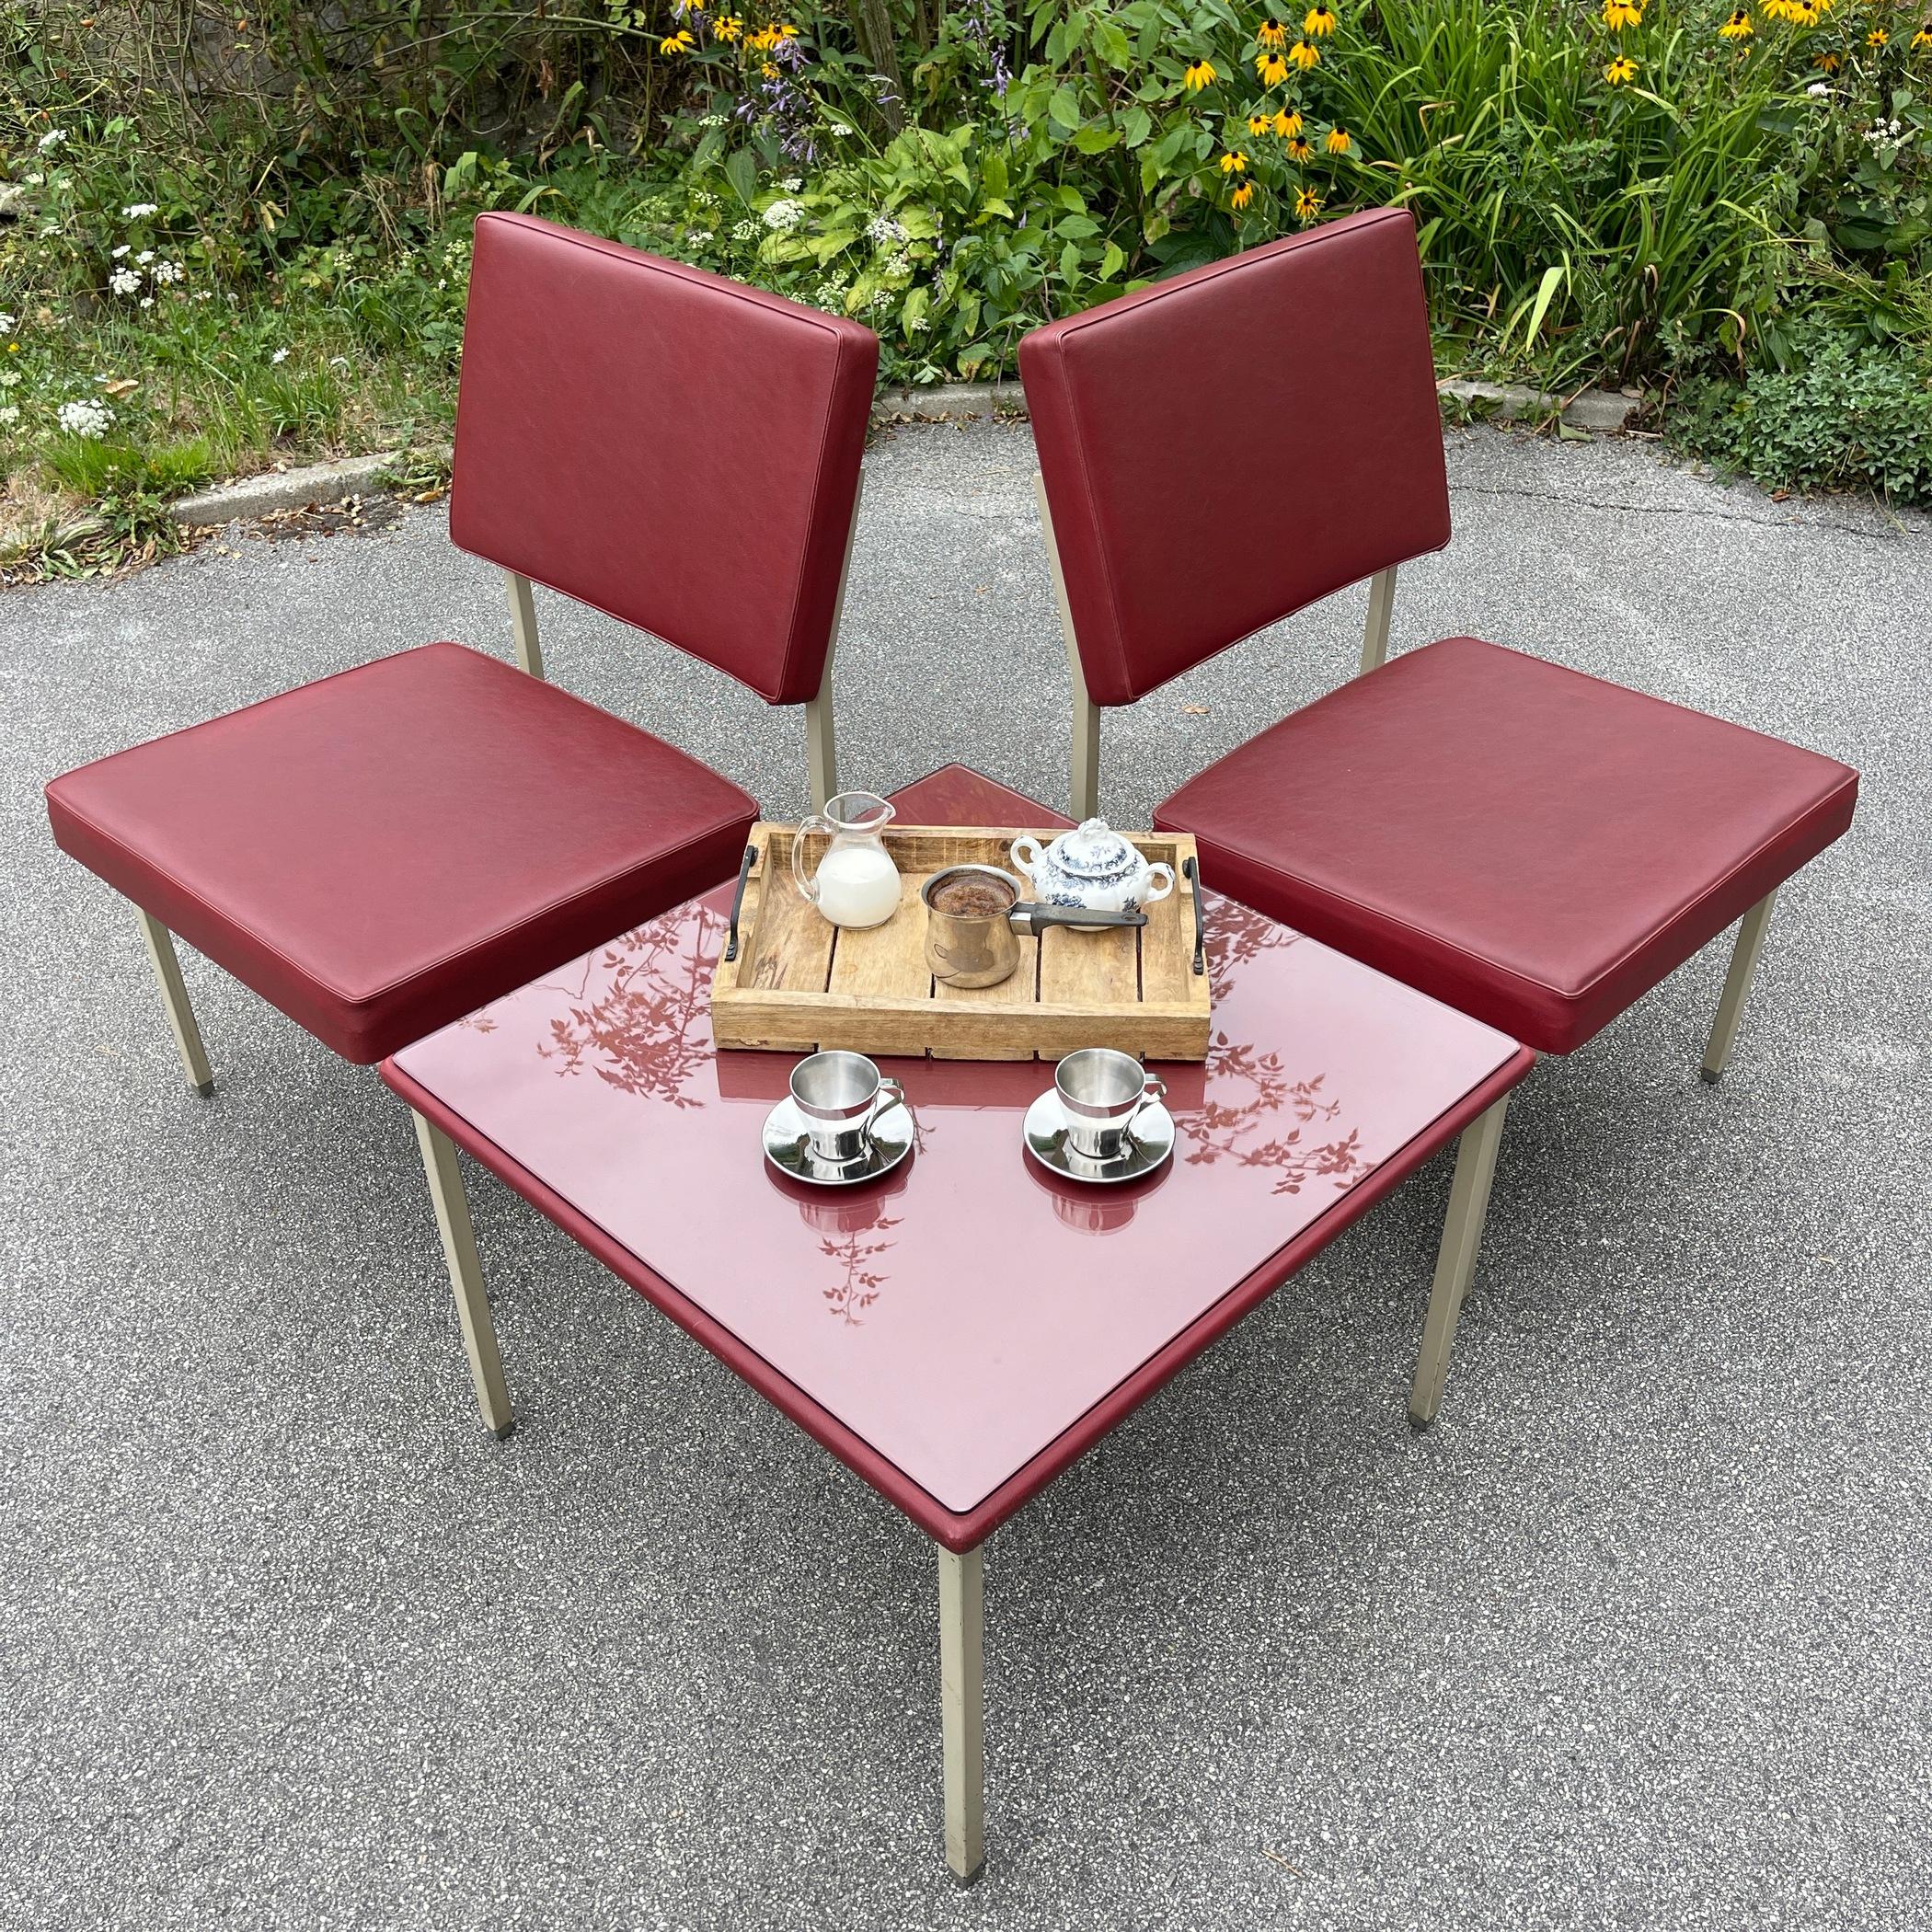 Rare set of vintage Anonima Castelli armchairs and coffee table, fantastic metal structure, with original leatherette.
Made in Italy in the 1950s.
Excellent vintage condition. All items have a label Anonima Castelli.
Dimensions:
Table: height 45